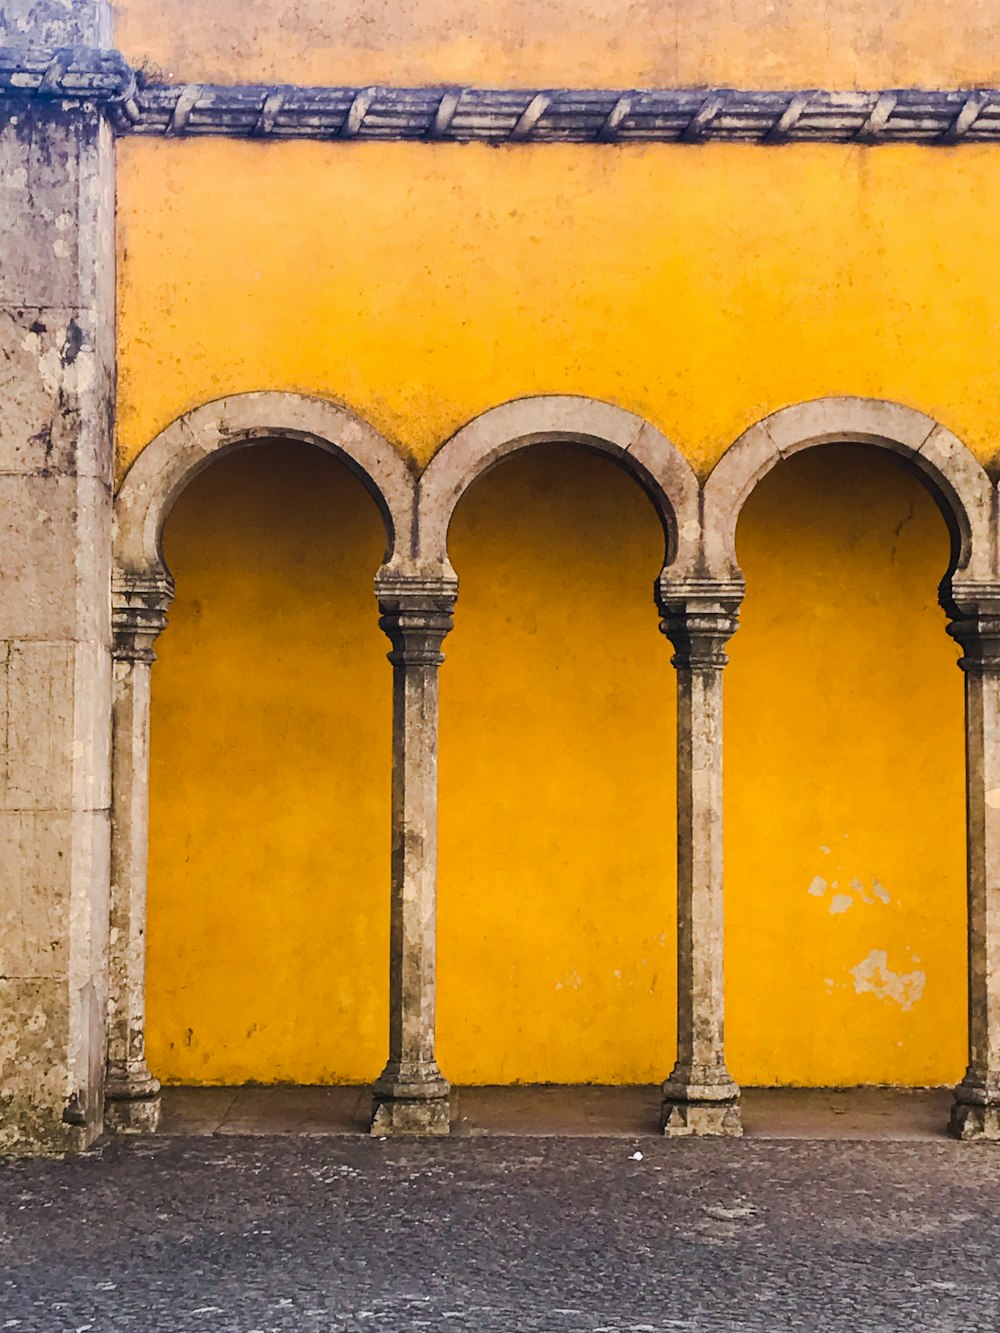 yellow and white concrete wall